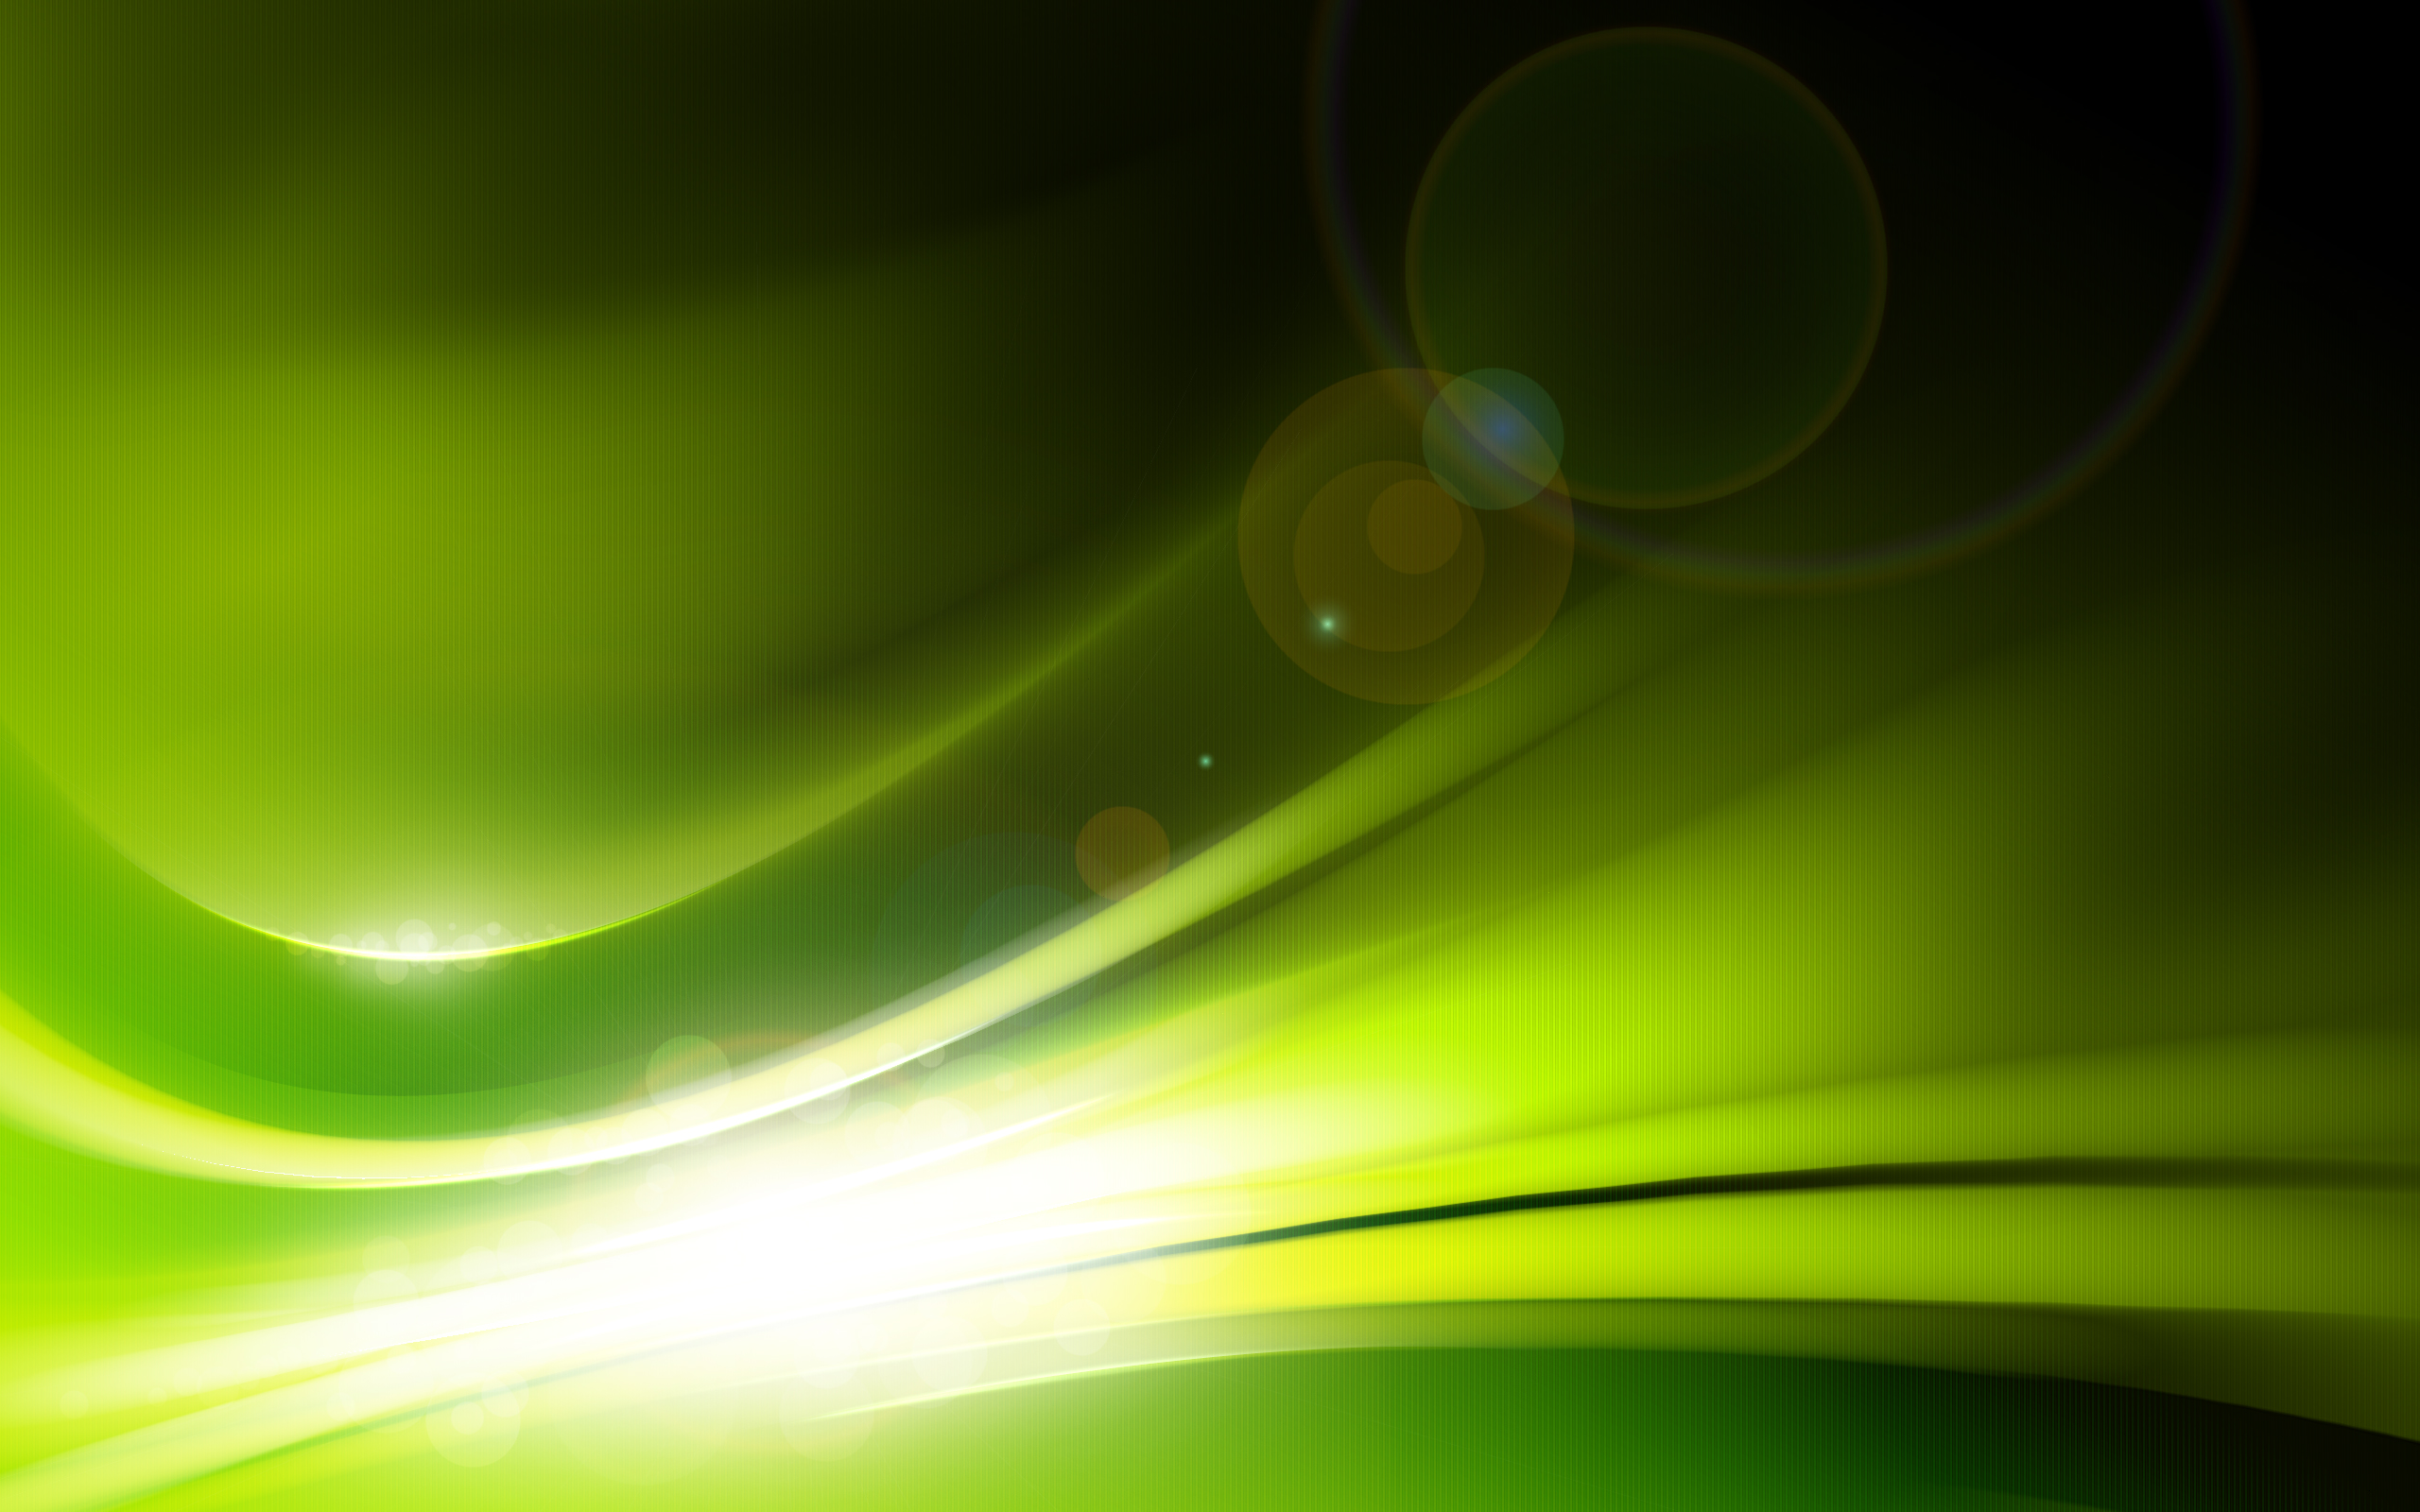 wallpapers and backgrounds,green,light,yellow,technology,graphics